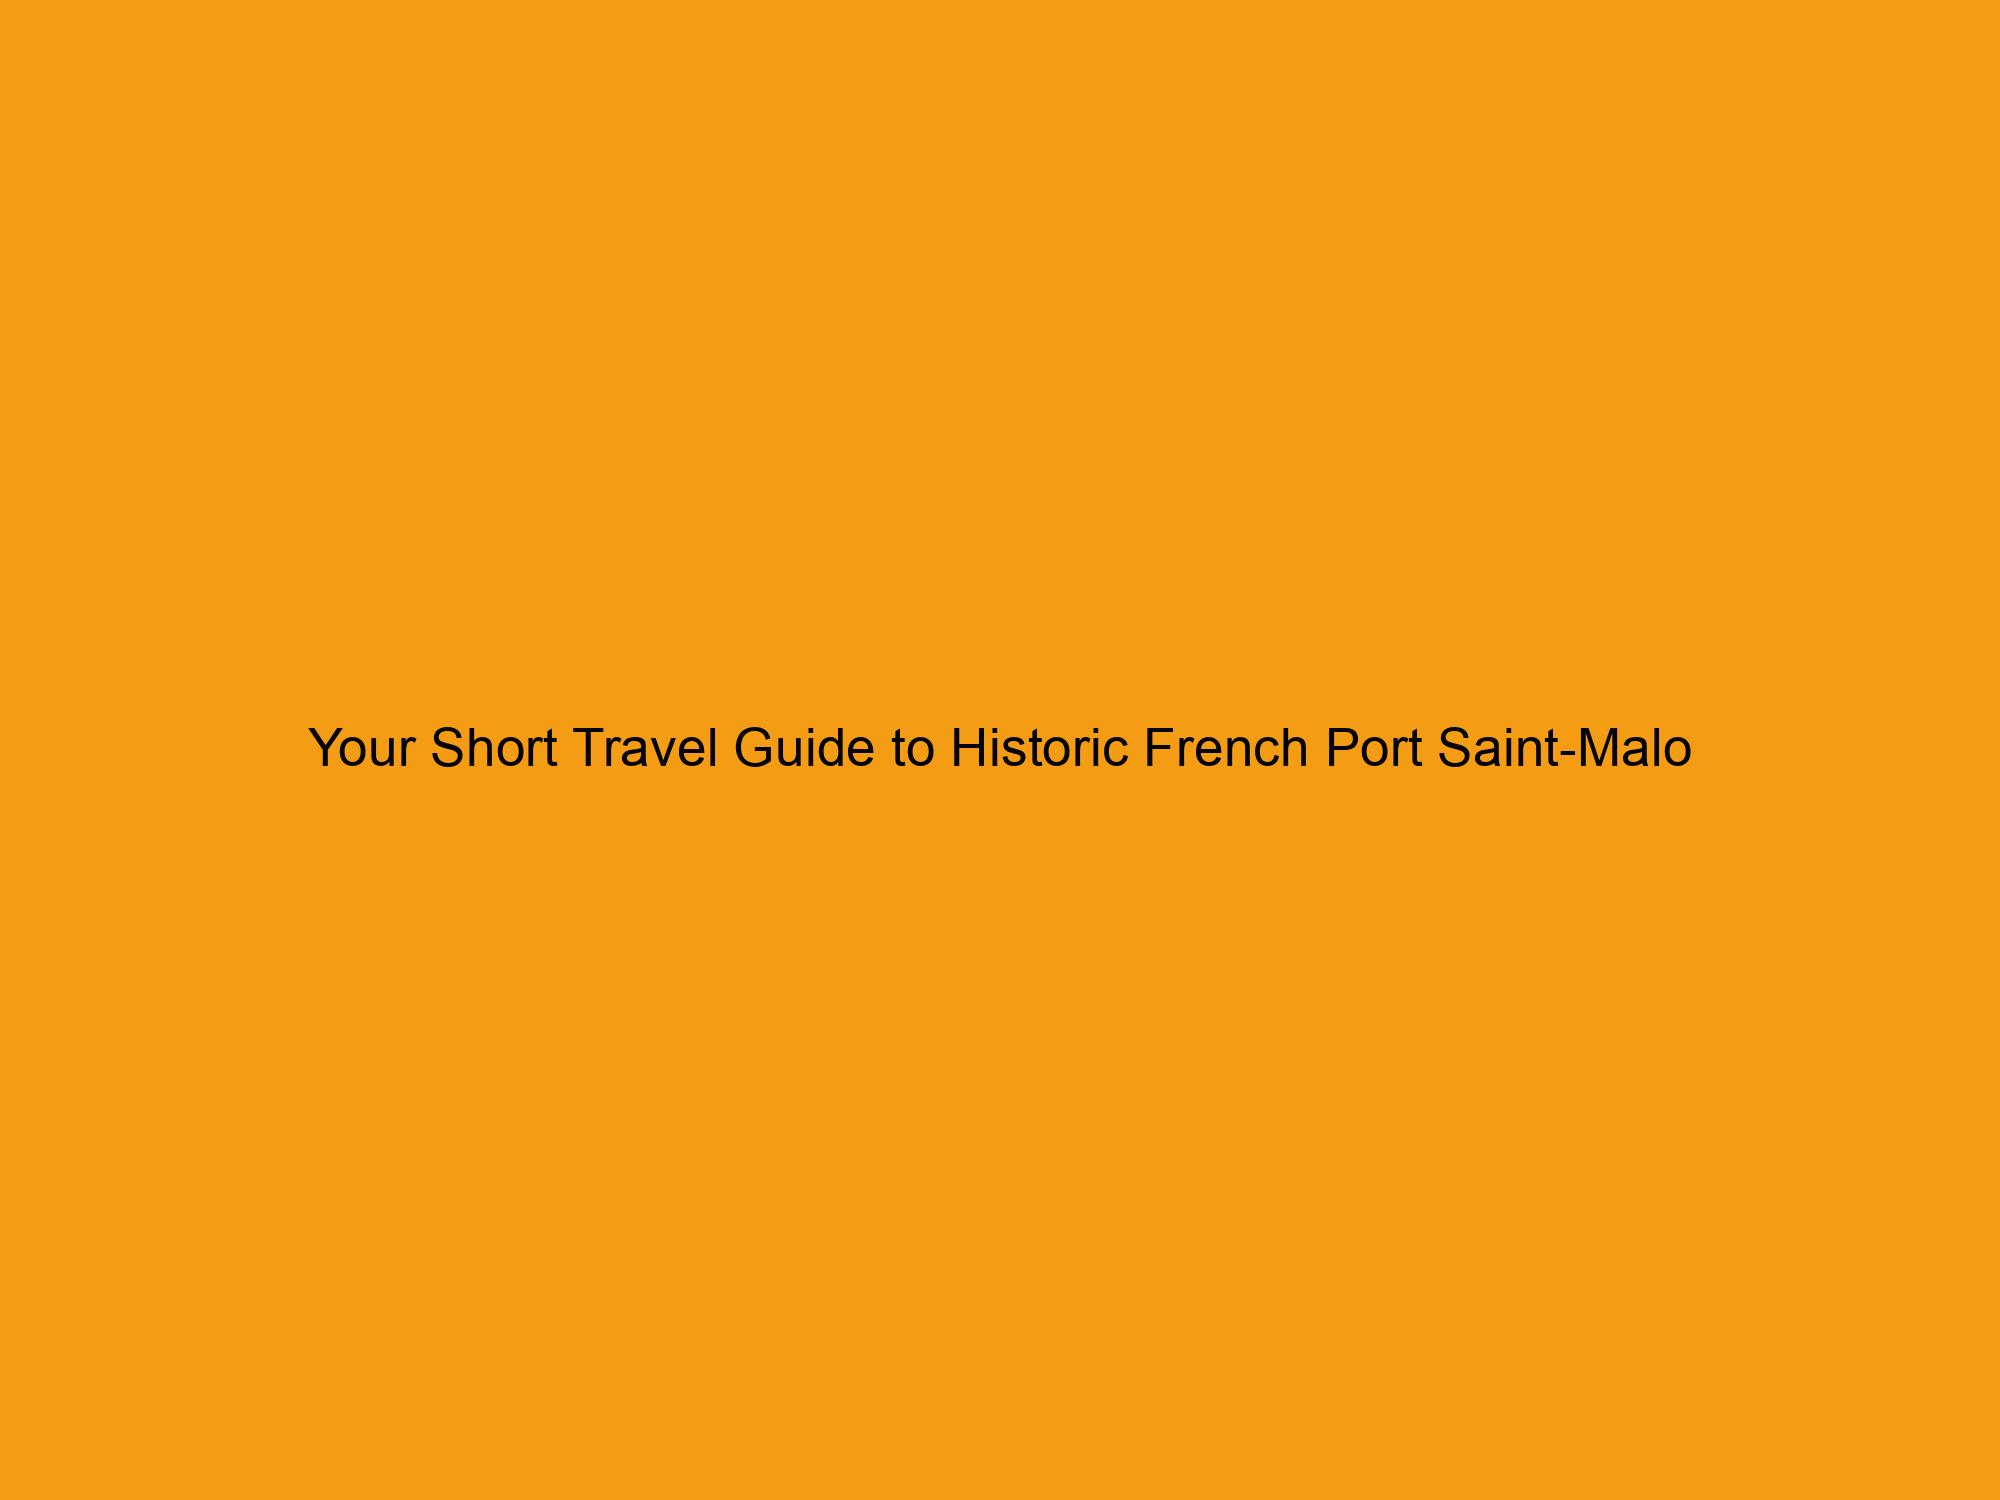 Your Short Travel Guide to Historic French Port Saint-Malo